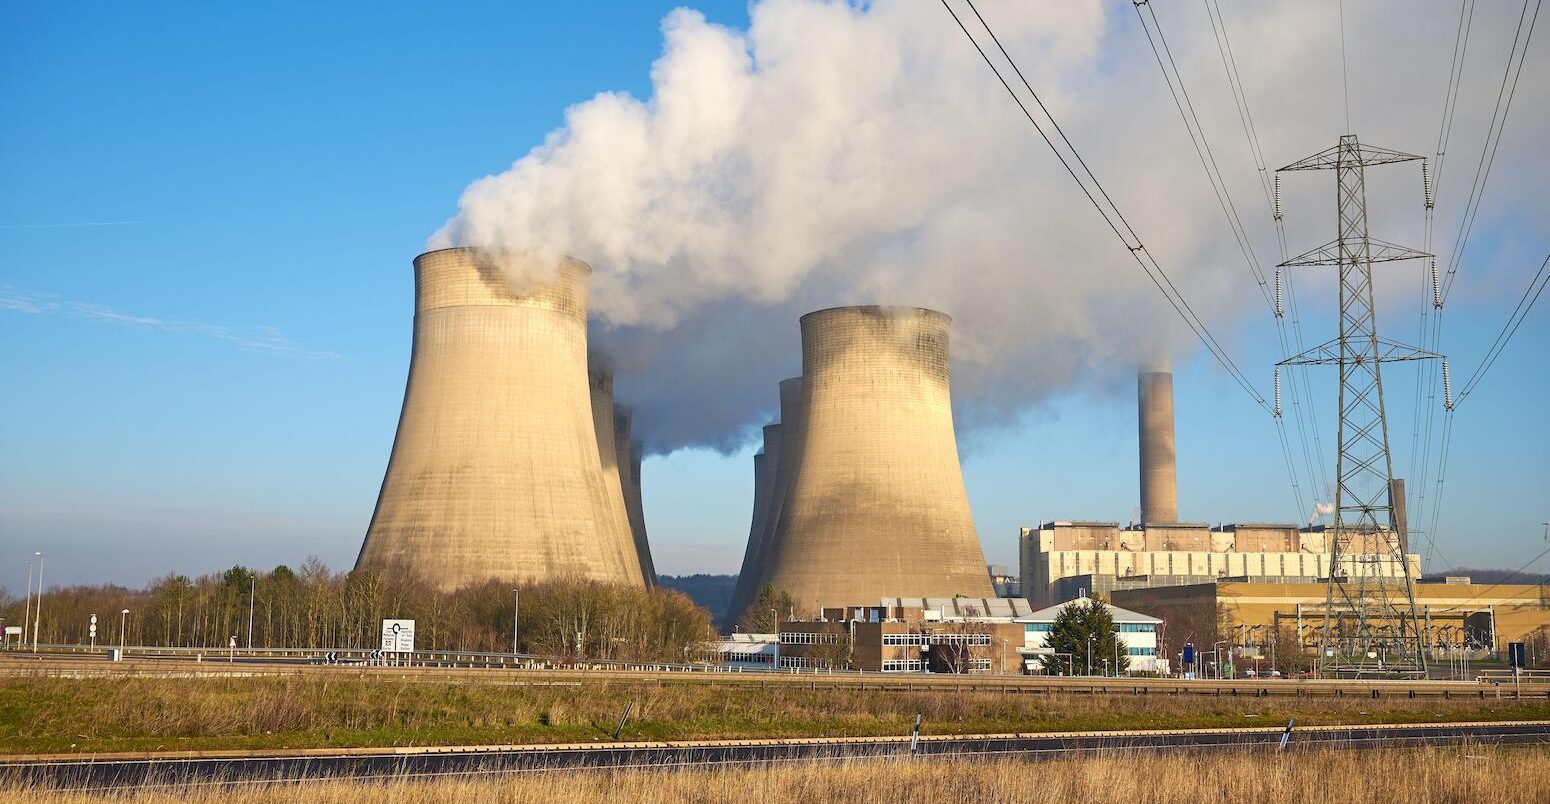 Steam rising from cooling towers at Ratcliffe on Soar power station, Nottinghamshire. Credit: Simon Annable / Alamy Stock Photo